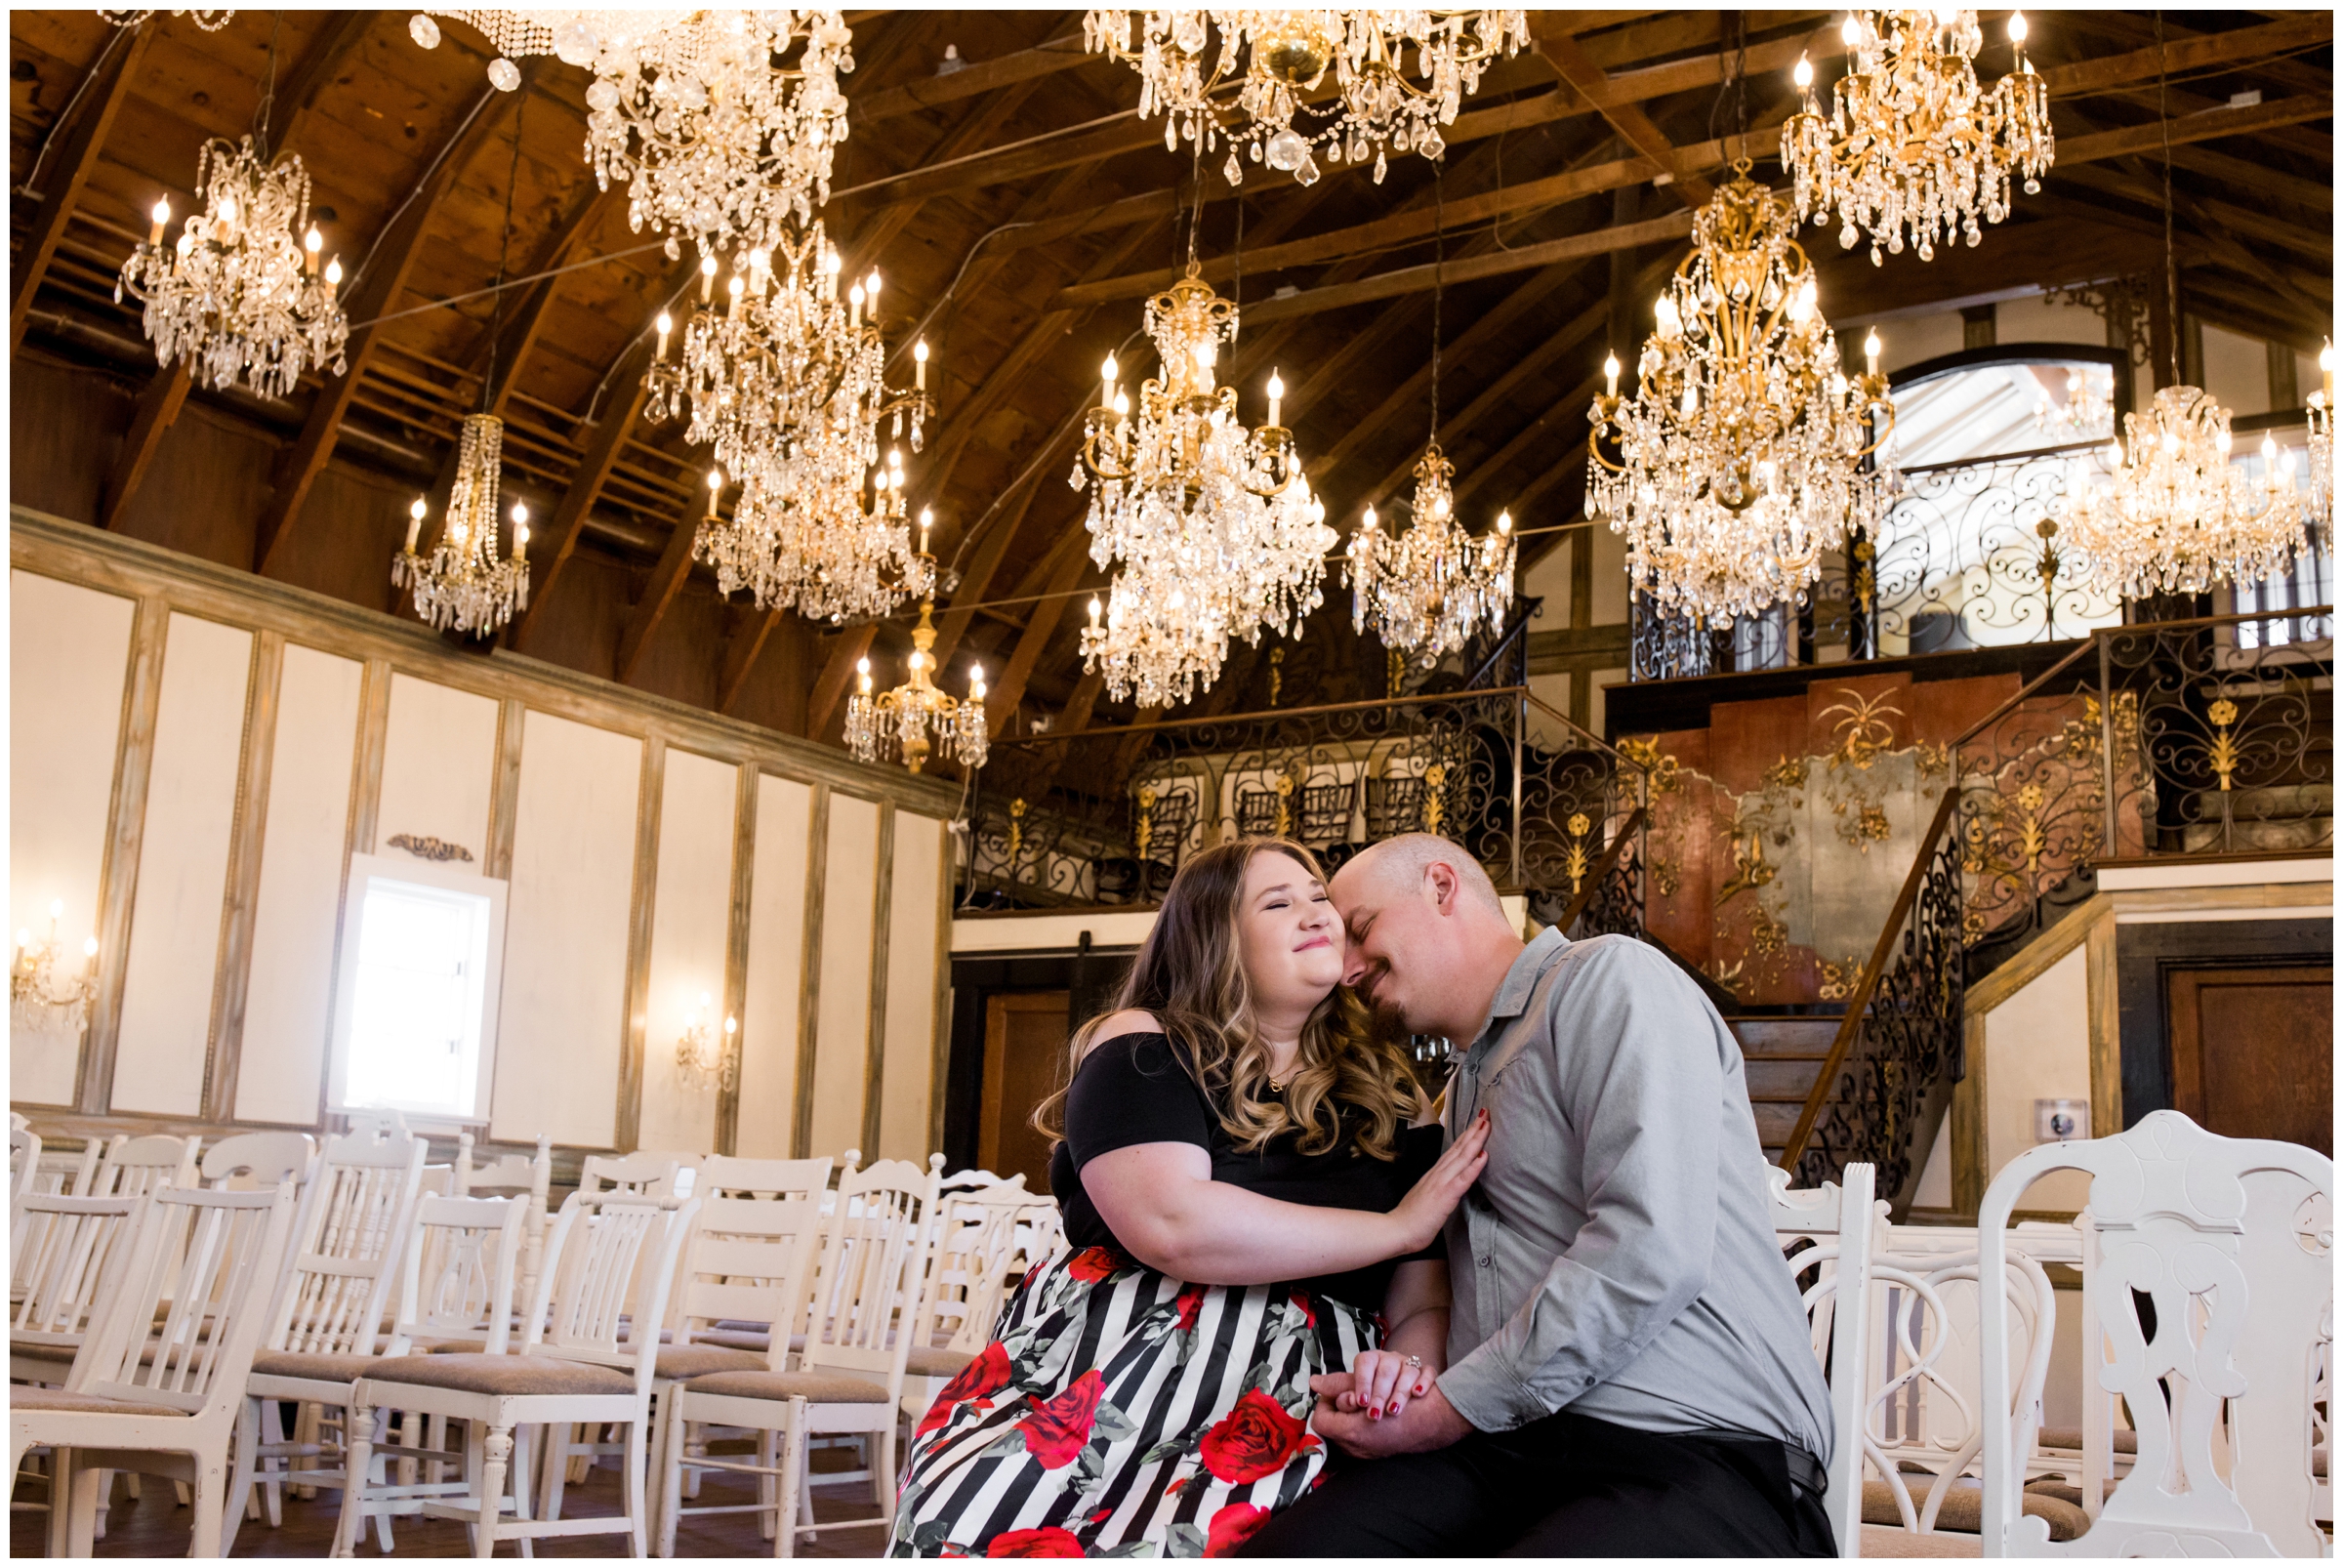 Lionsgate Event Center Colorado elopement photography inspiration at the Chandelier Barn